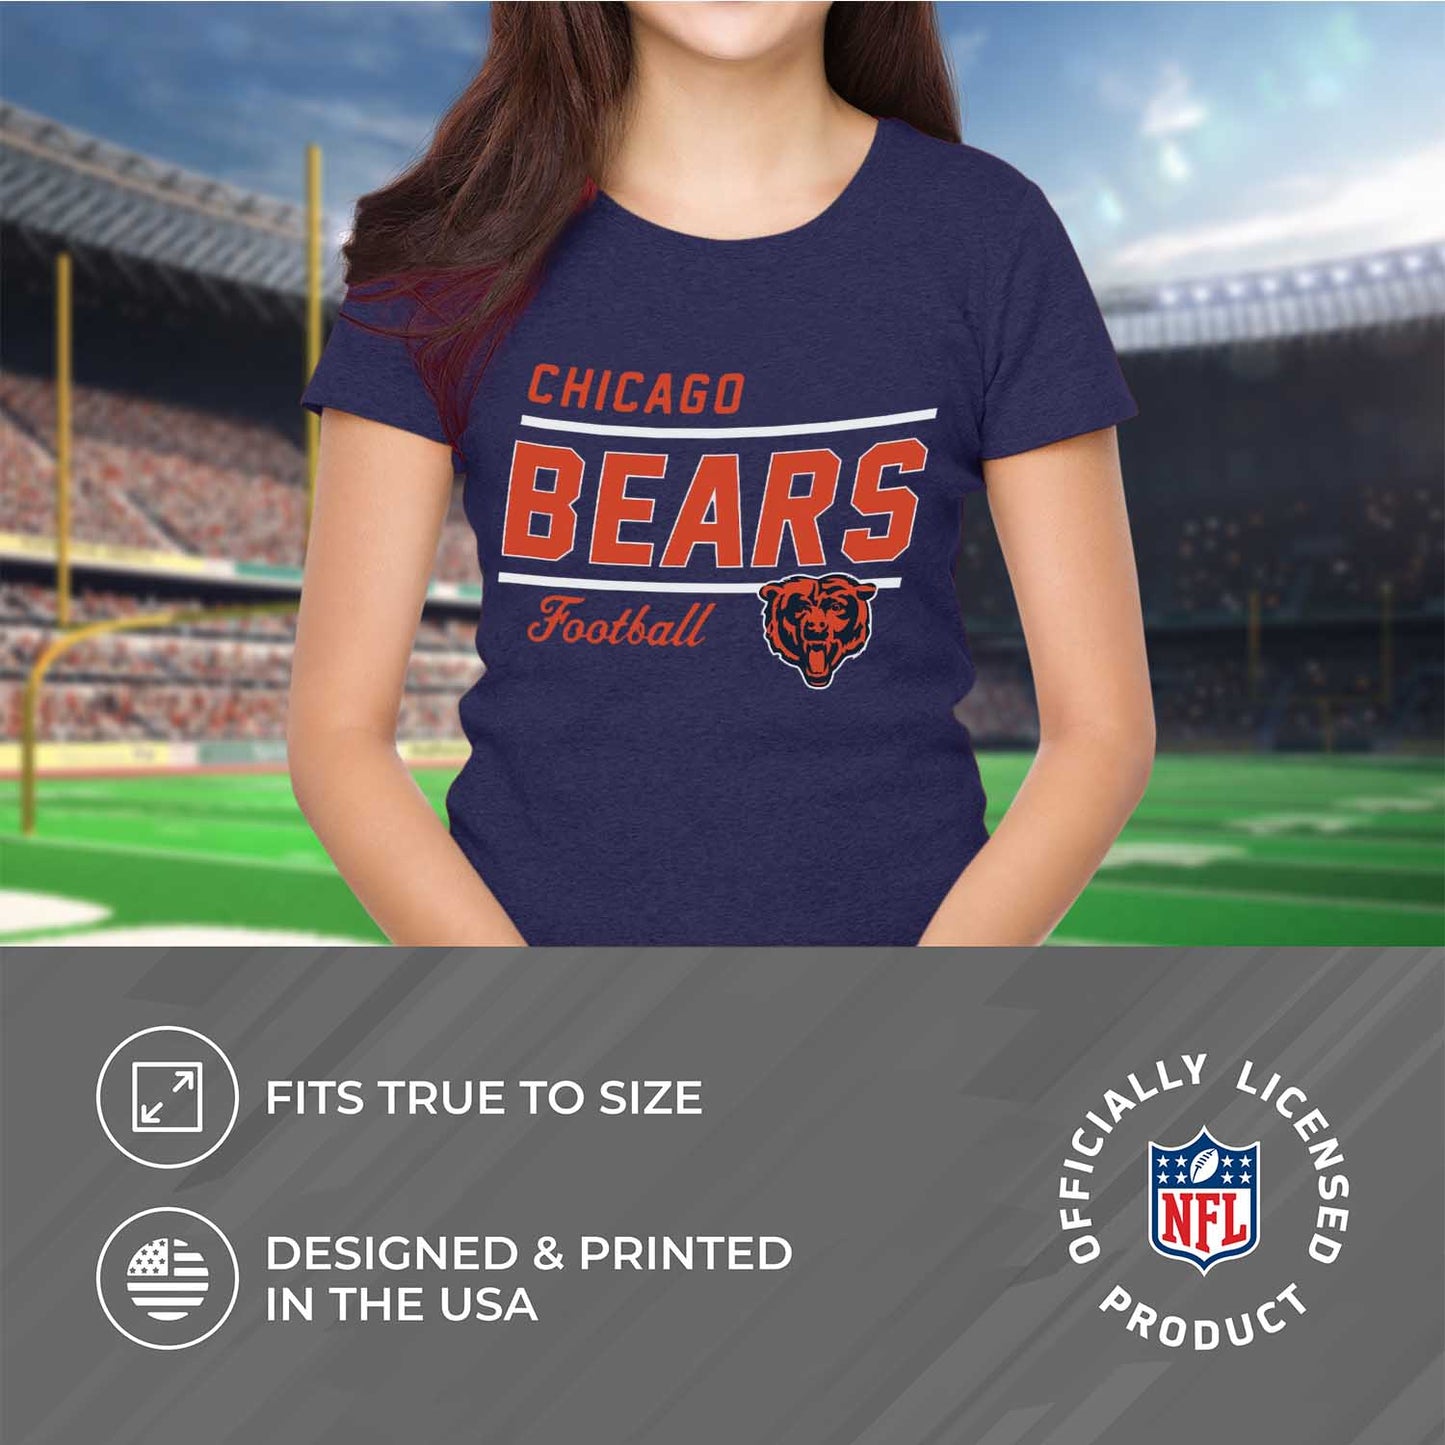 Chicago Bears NFL Womens Plus Size Relaxed Fit T-Shirt - Navy